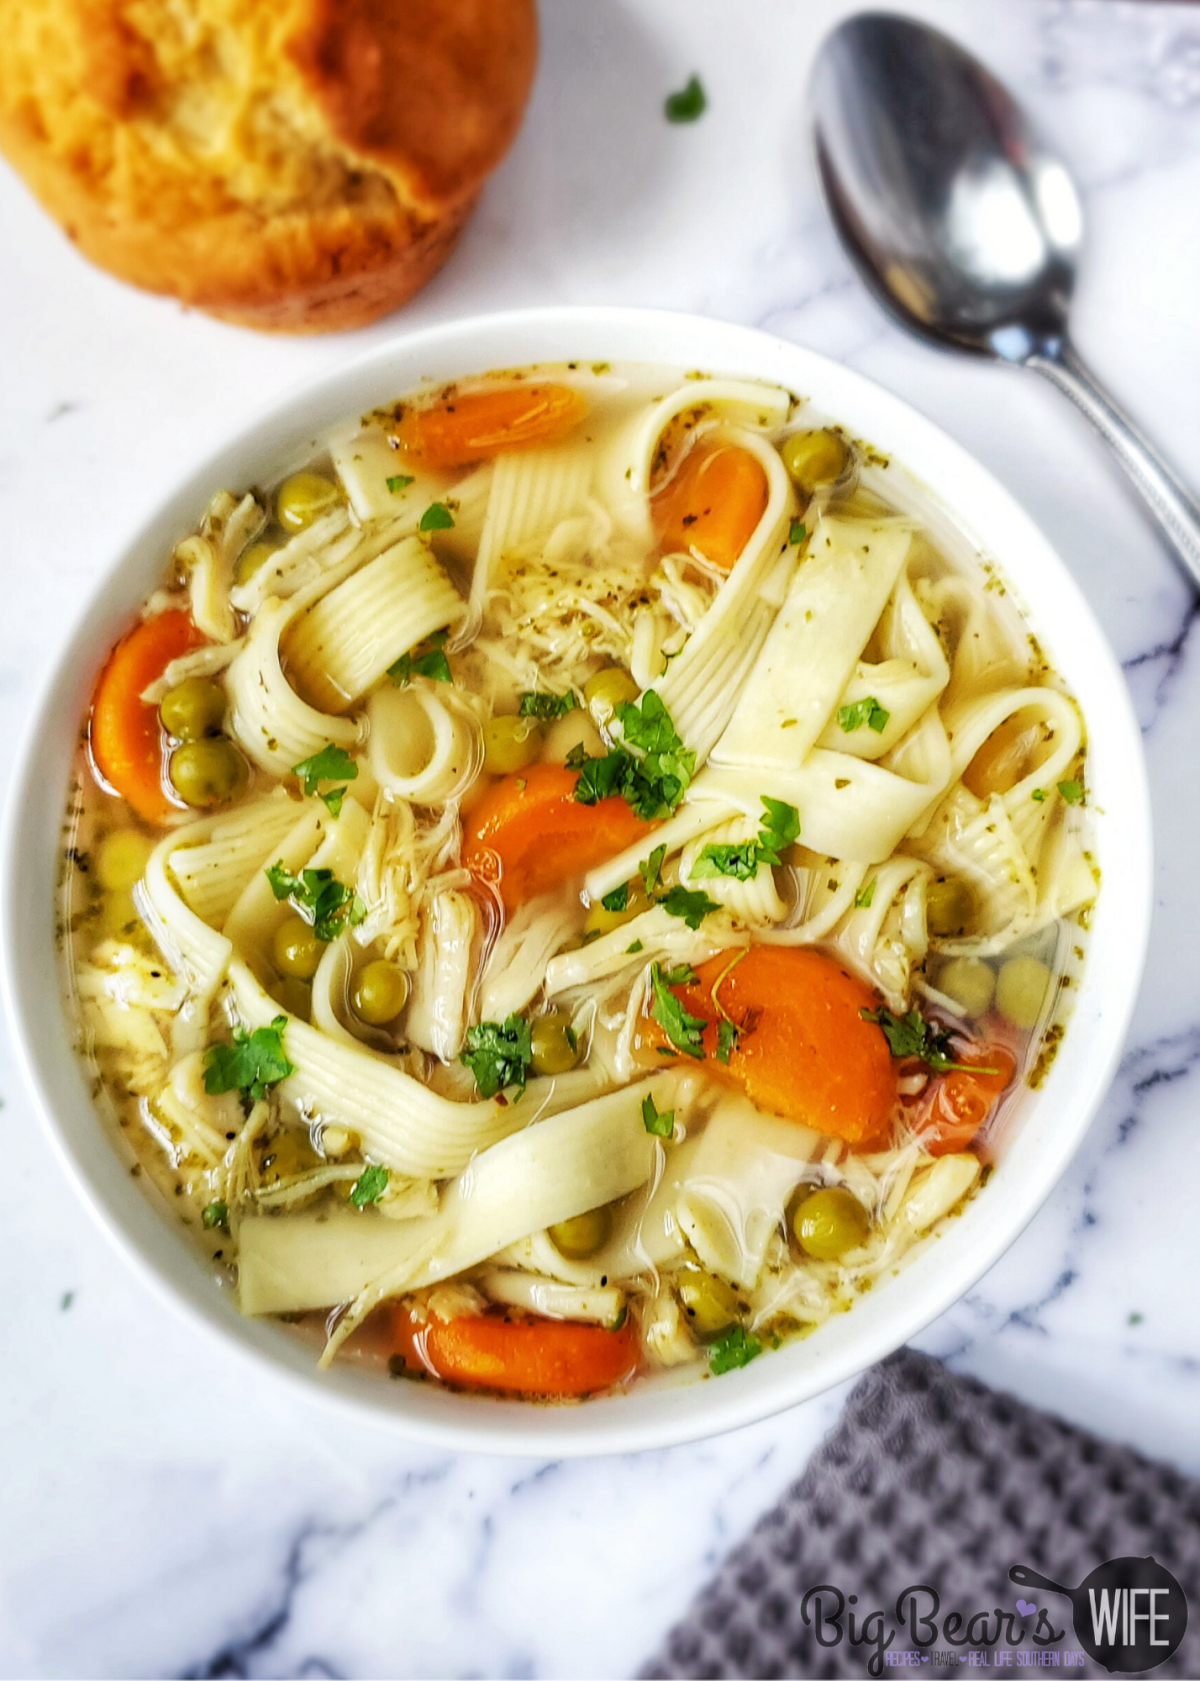 https://www.bigbearswife.com/wp-content/uploads/2020/05/30-Minute-Pantry-Chicken-Noodle-Soup-3.png